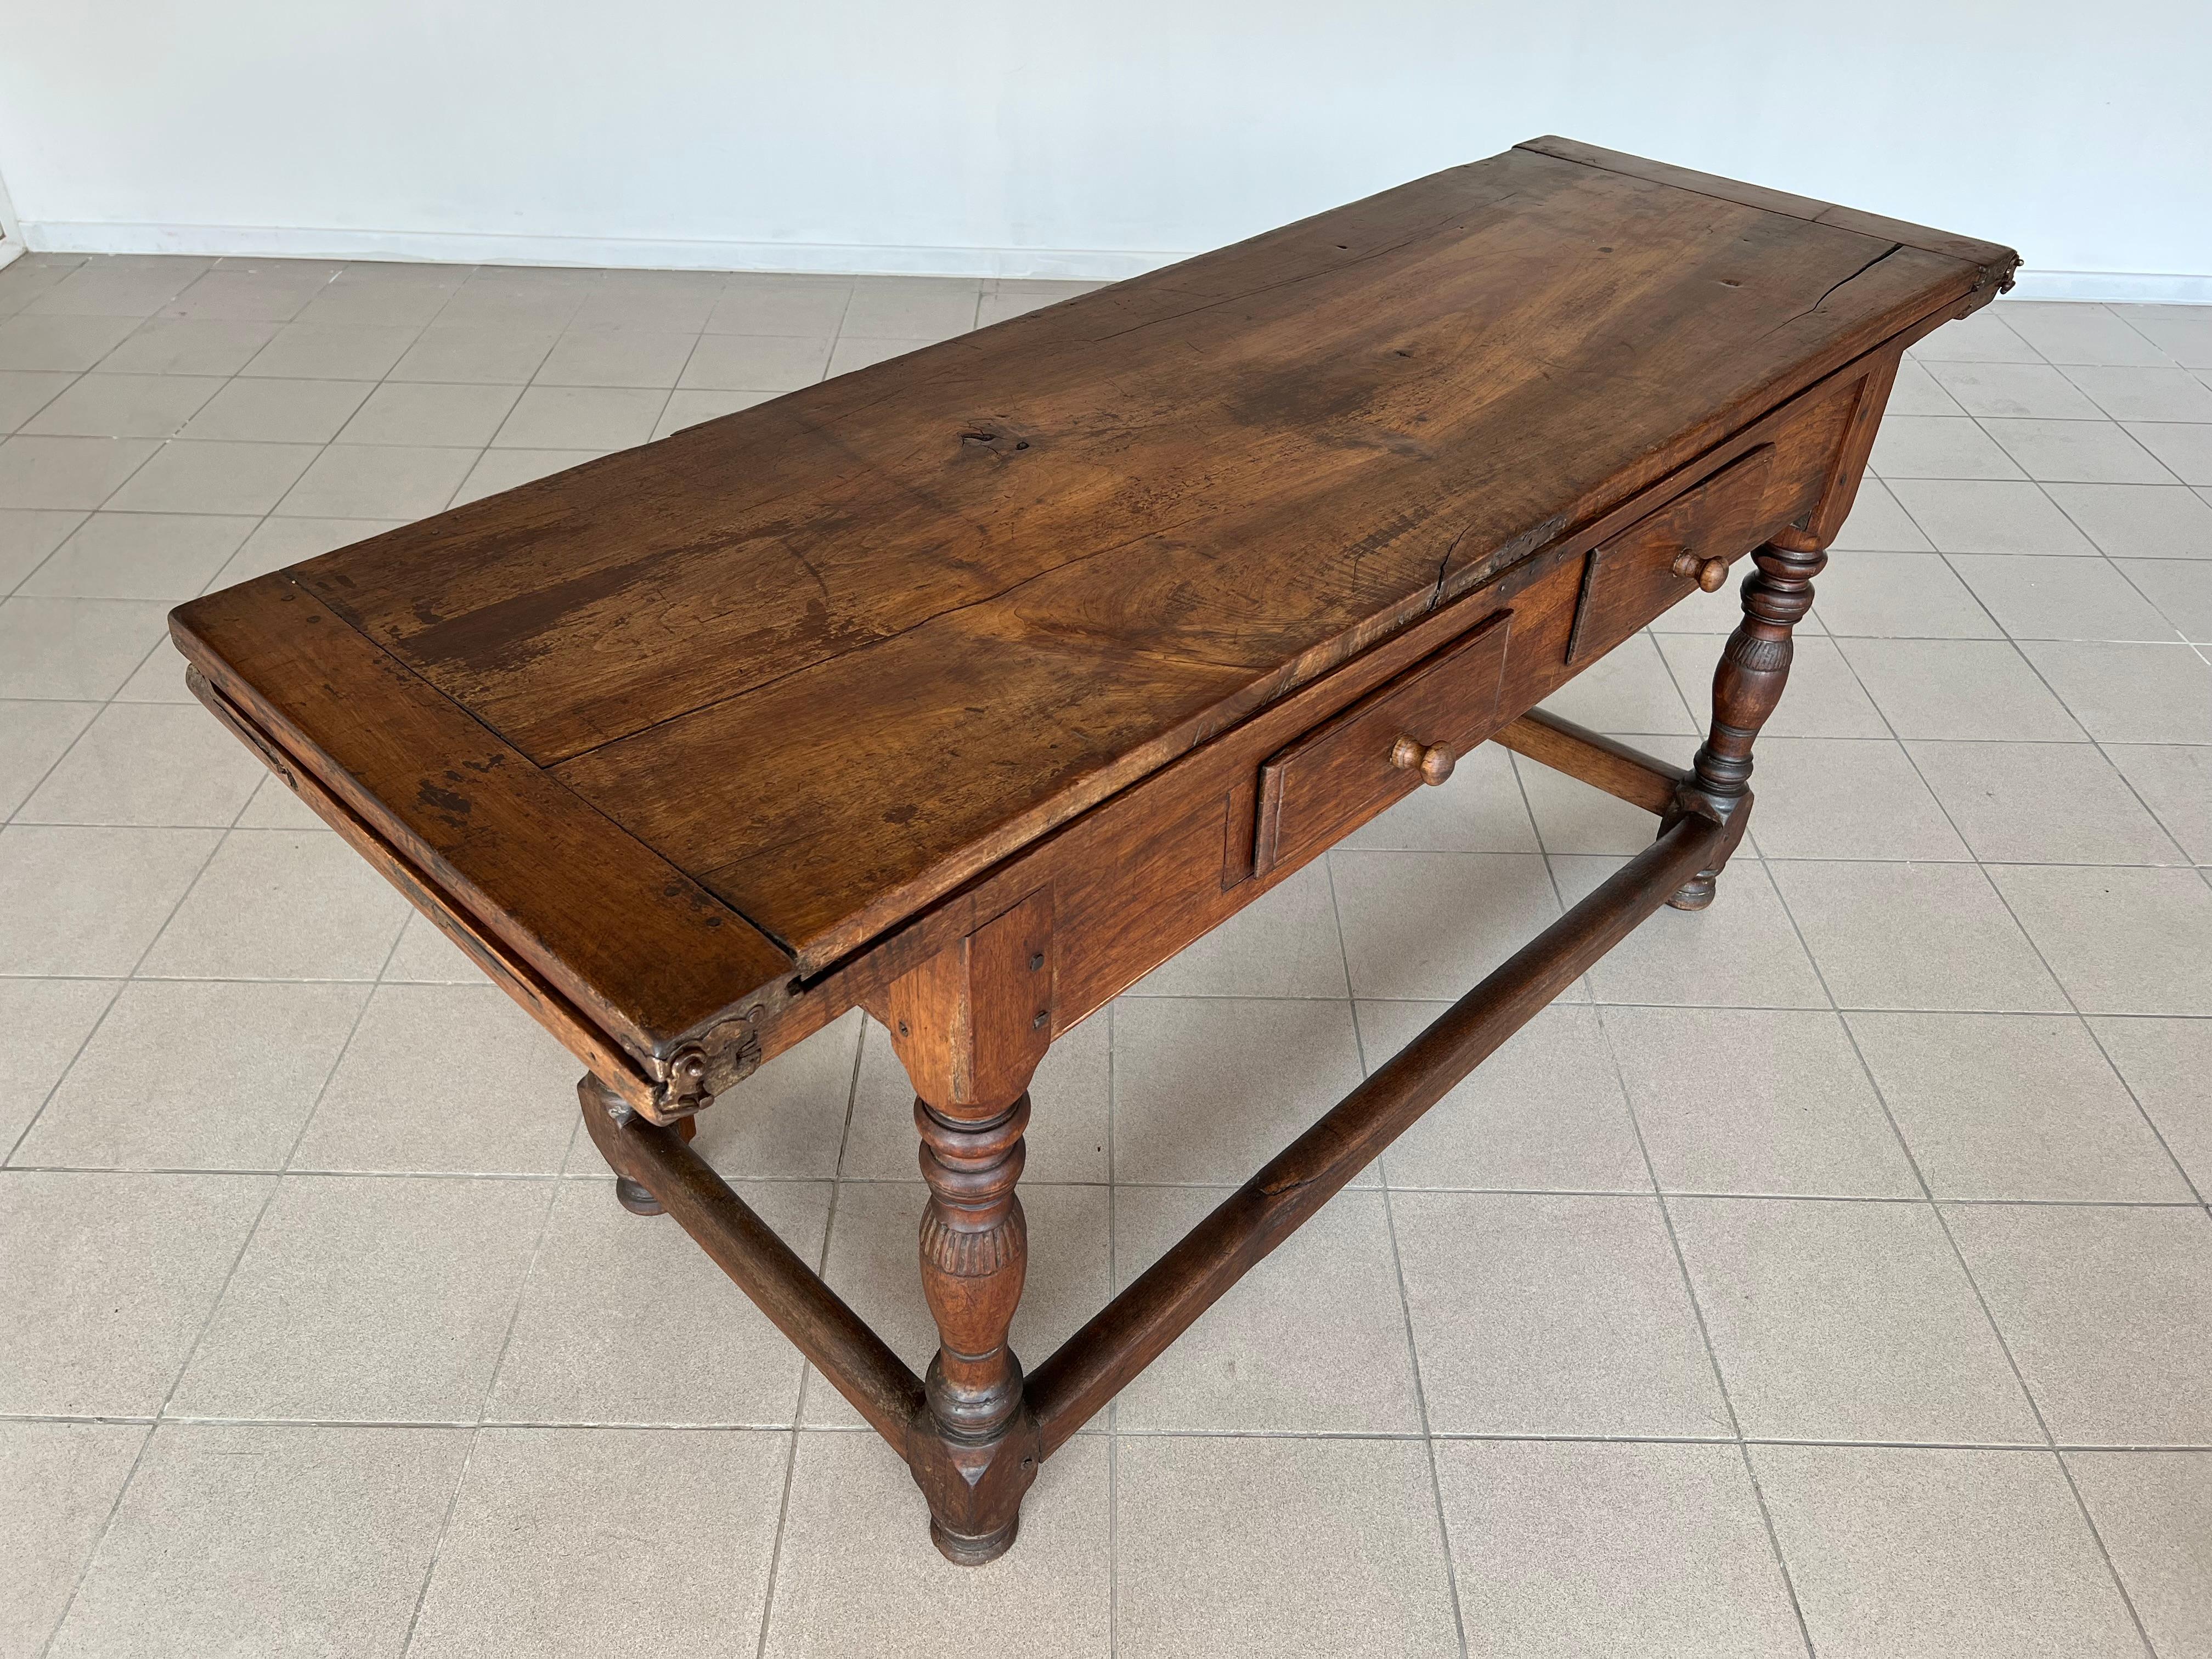 Rare 18c Swiss French Alp Rustic Flip Top Dining Table or Desk With Two Drawers For Sale 8